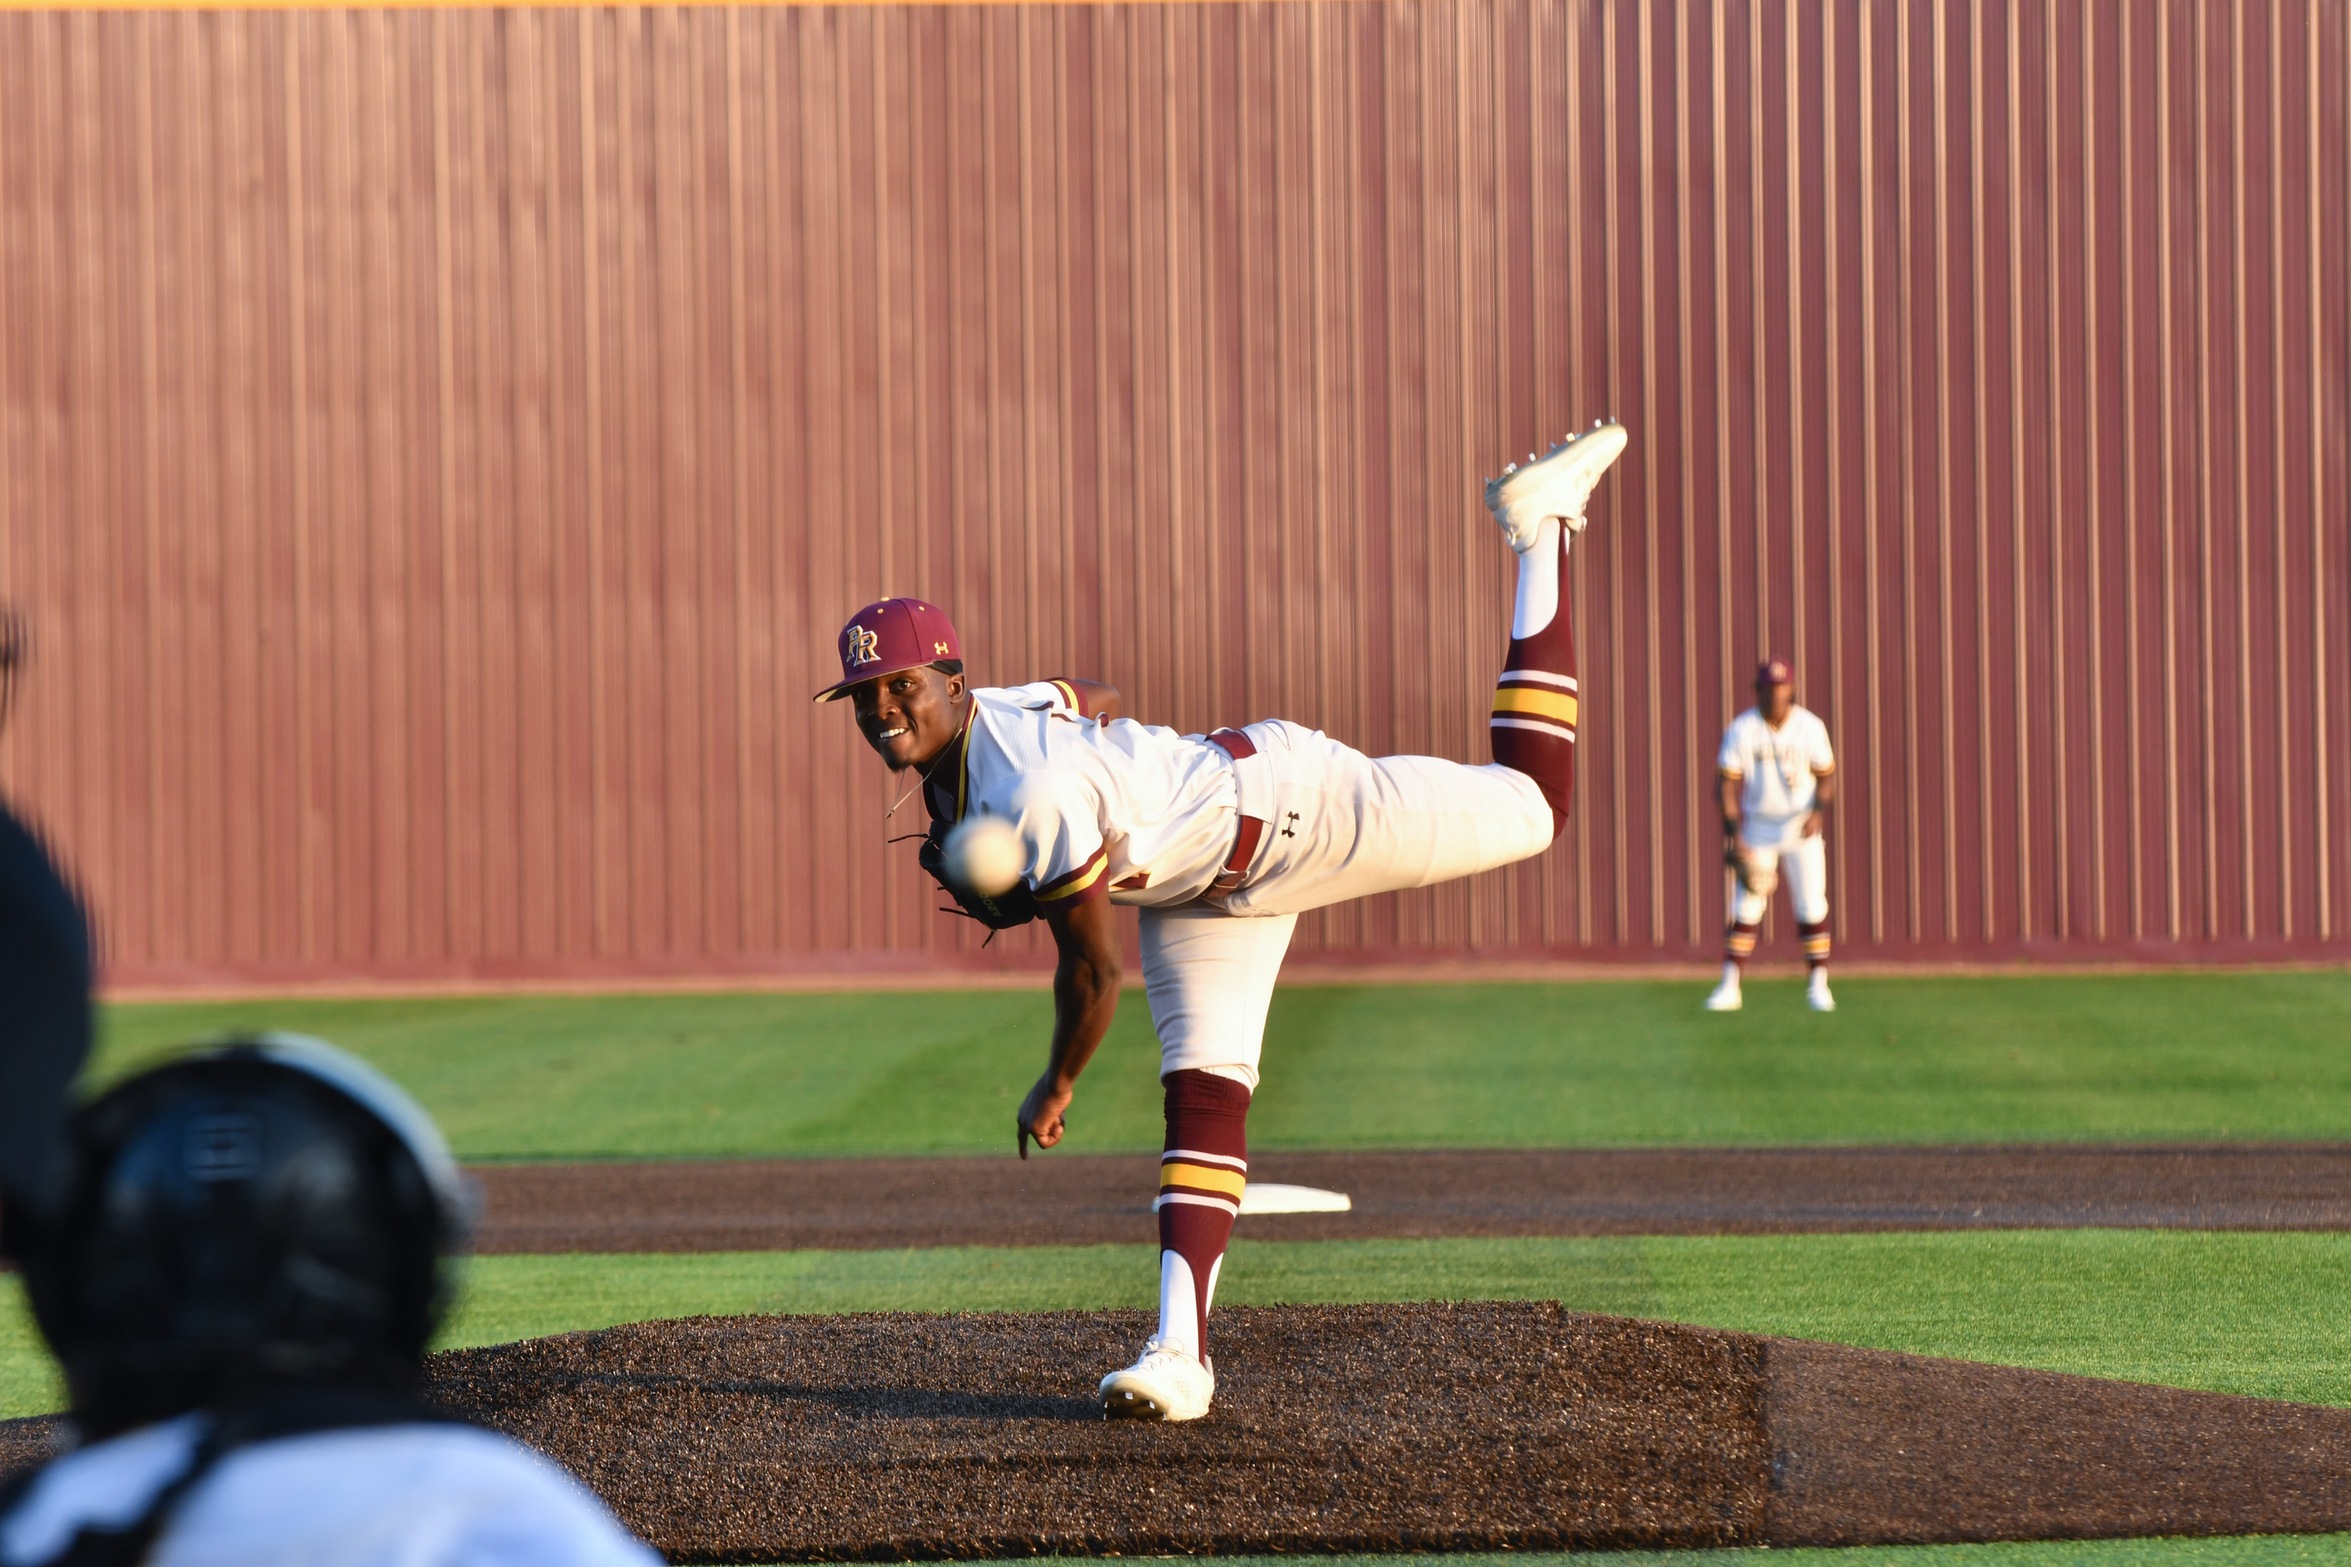 No. 1 PRCC bounces back to earn split with Illinois Central